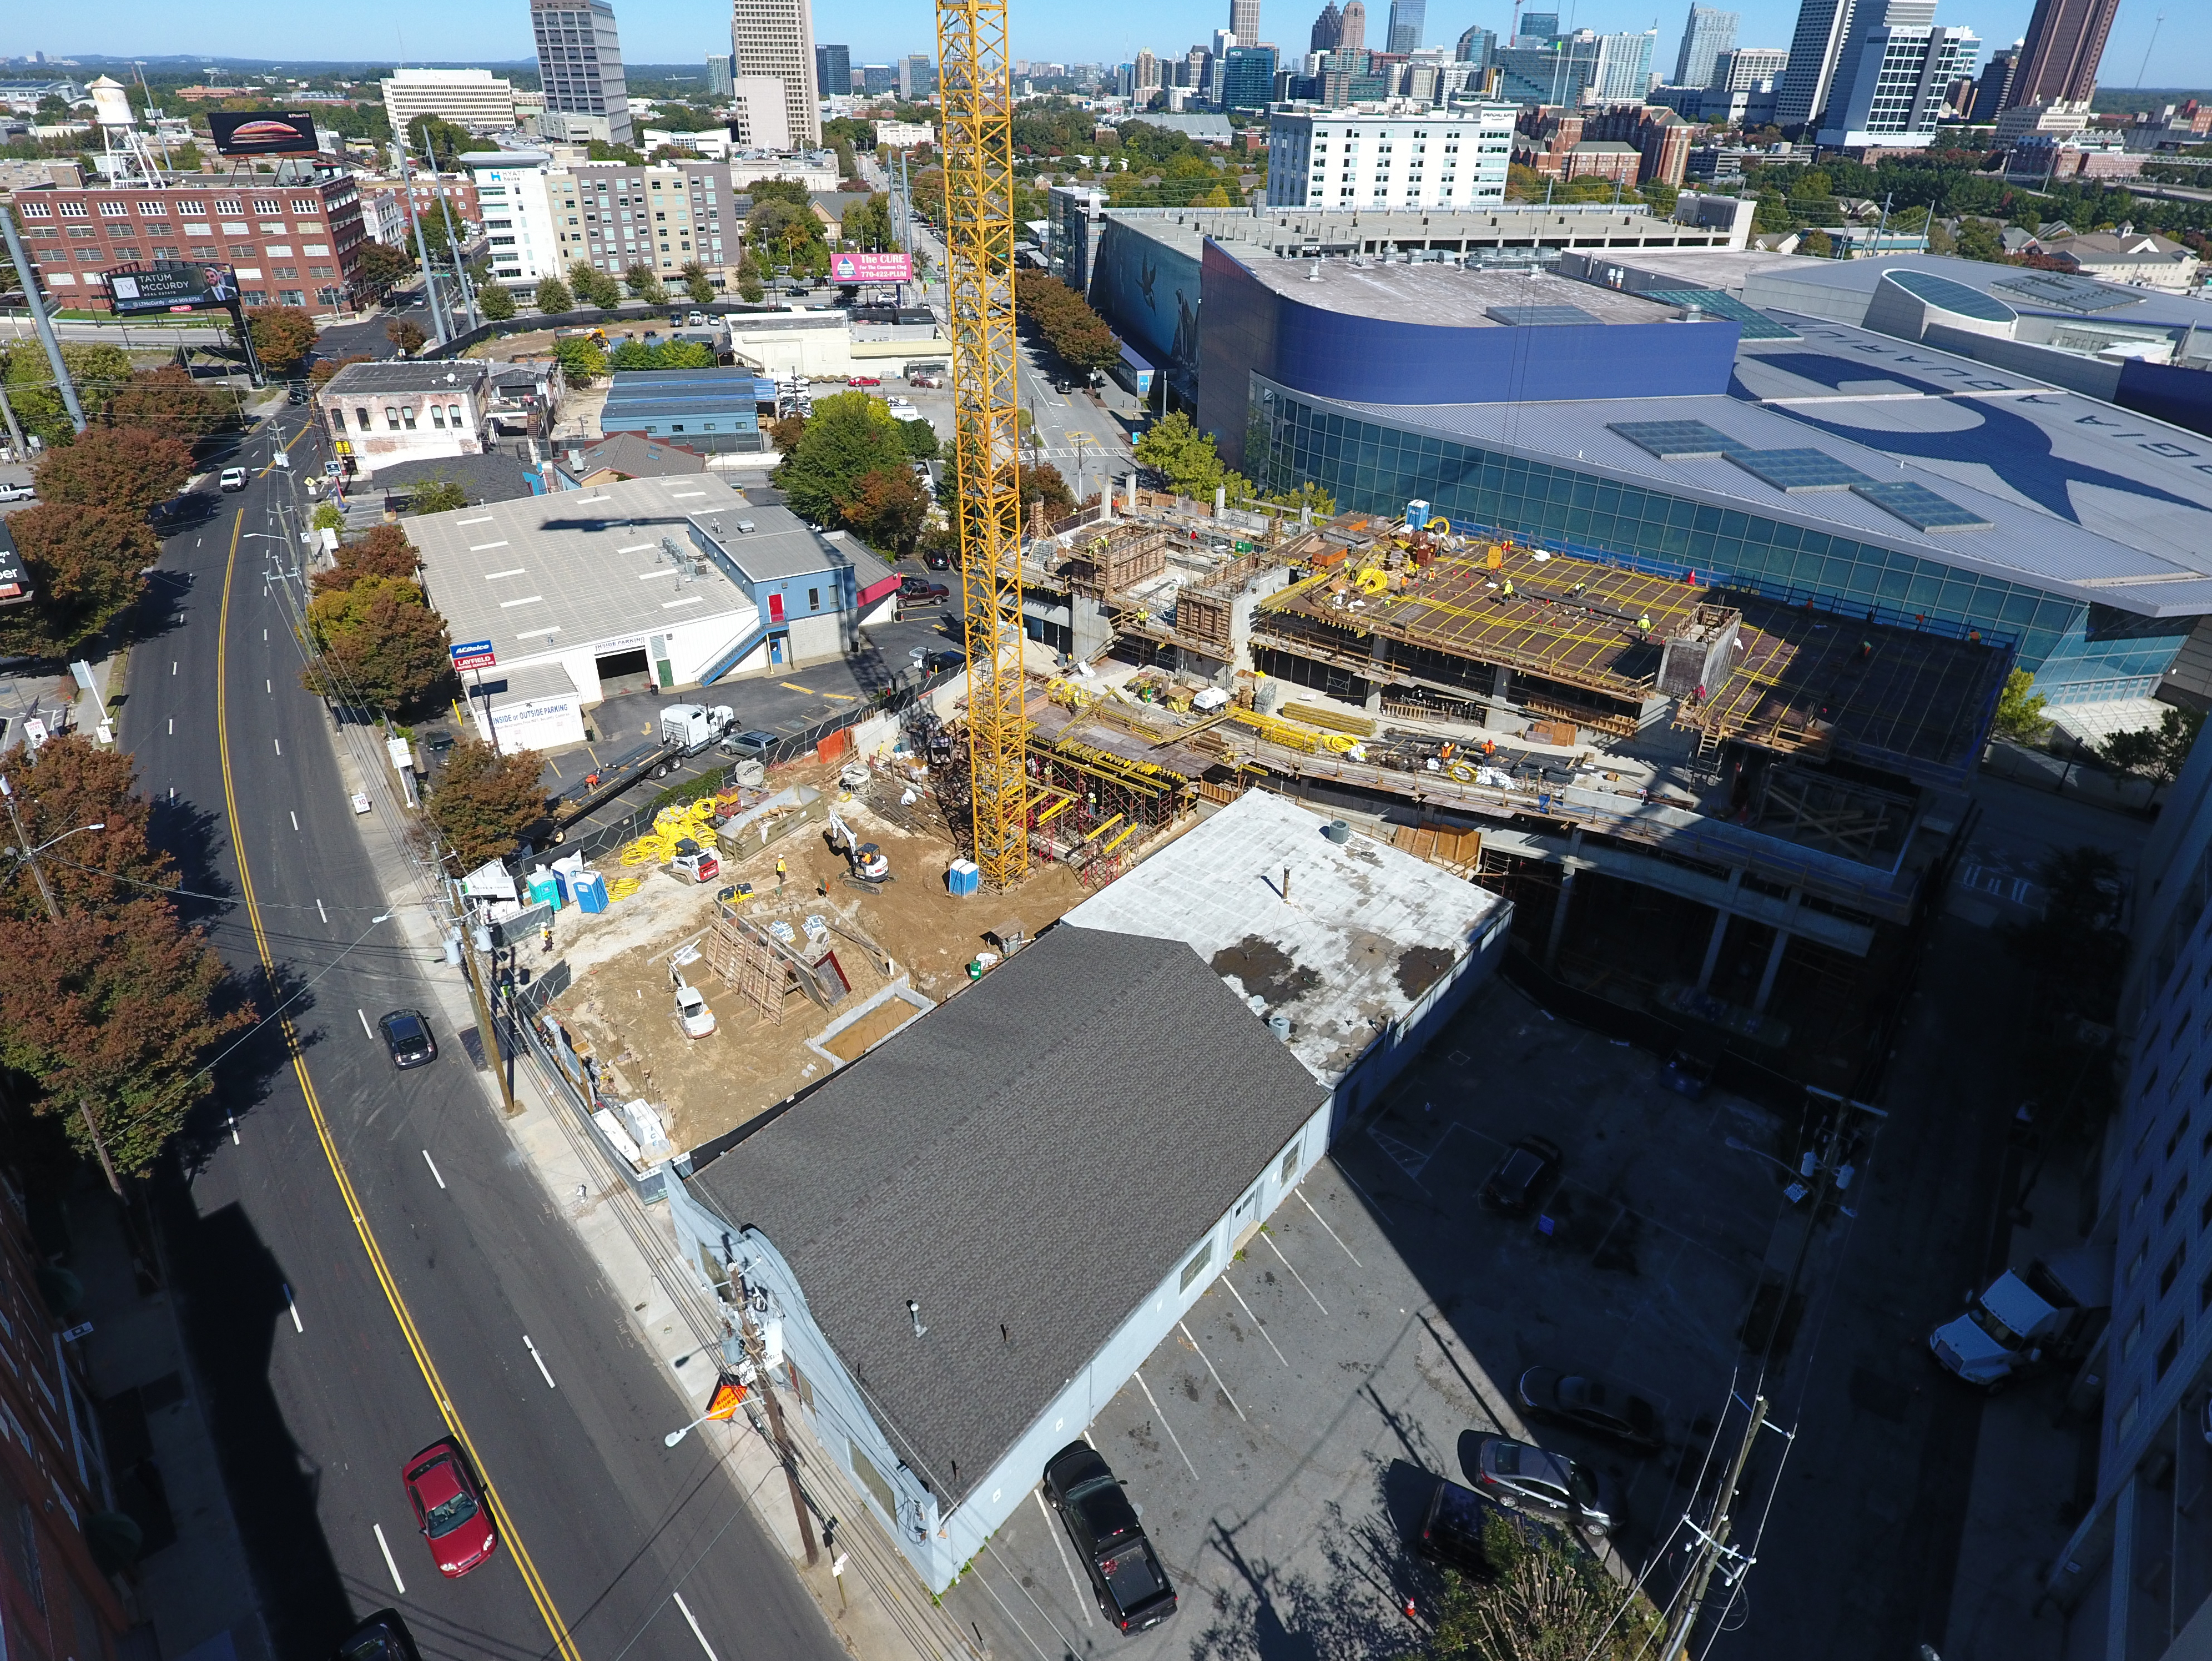 The Luckie Street site last week where a downtown Atlanta hotel is rising up.